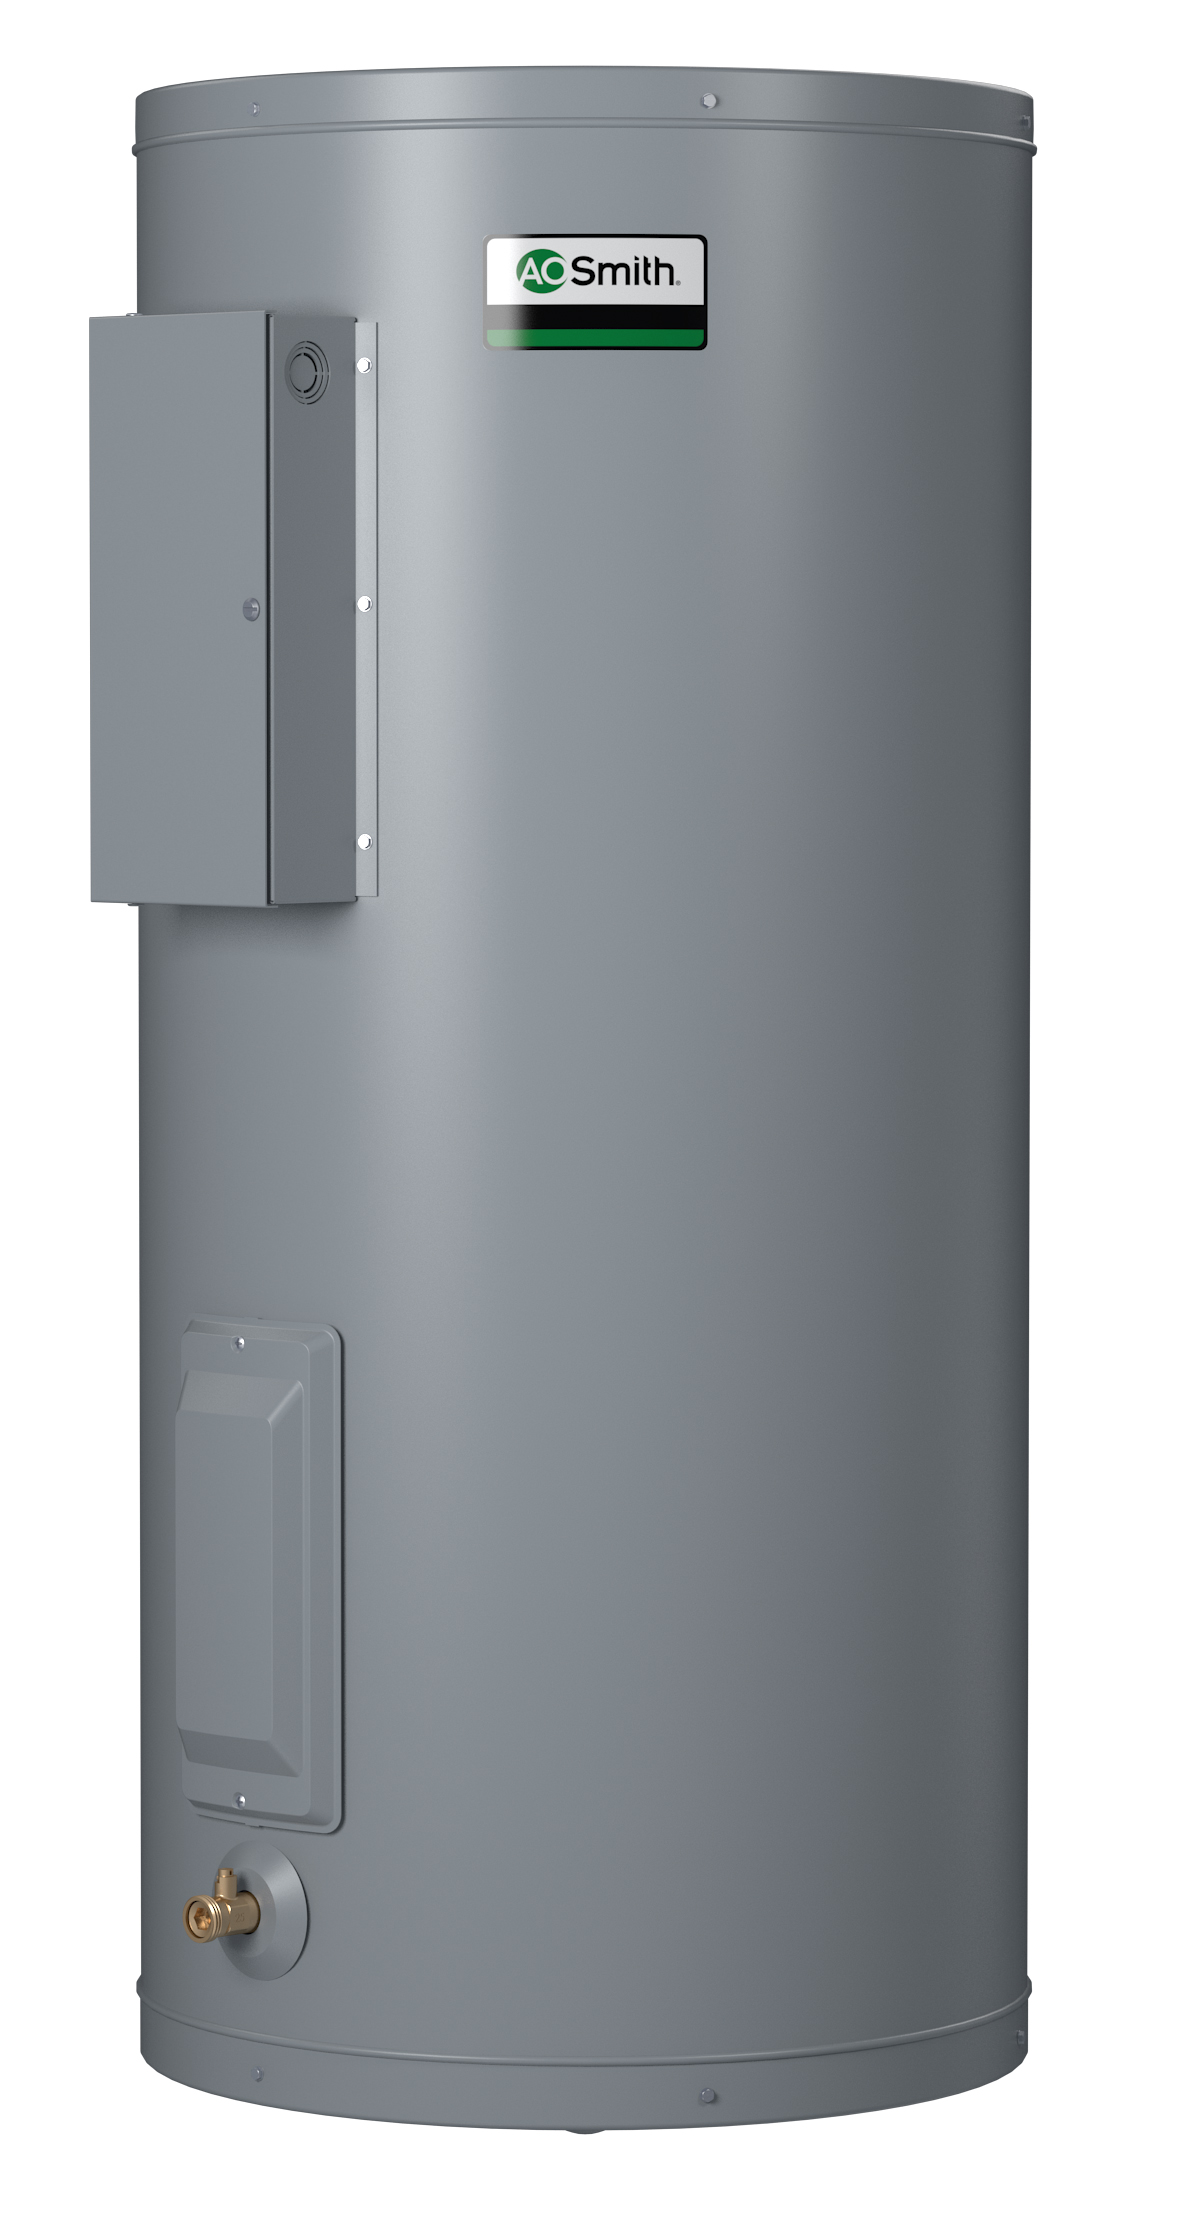 AO SMITH DEL-40D: 38 GALLONS, 10.0KW, 240 VOLT, 3 PHASE, (2-5000 WATT ELEMENTS, SIMULTANEOUS WIRING), DURA-POWER, LIGHT DUTY COMMERCIAL ELECTRIC WATER HEATER